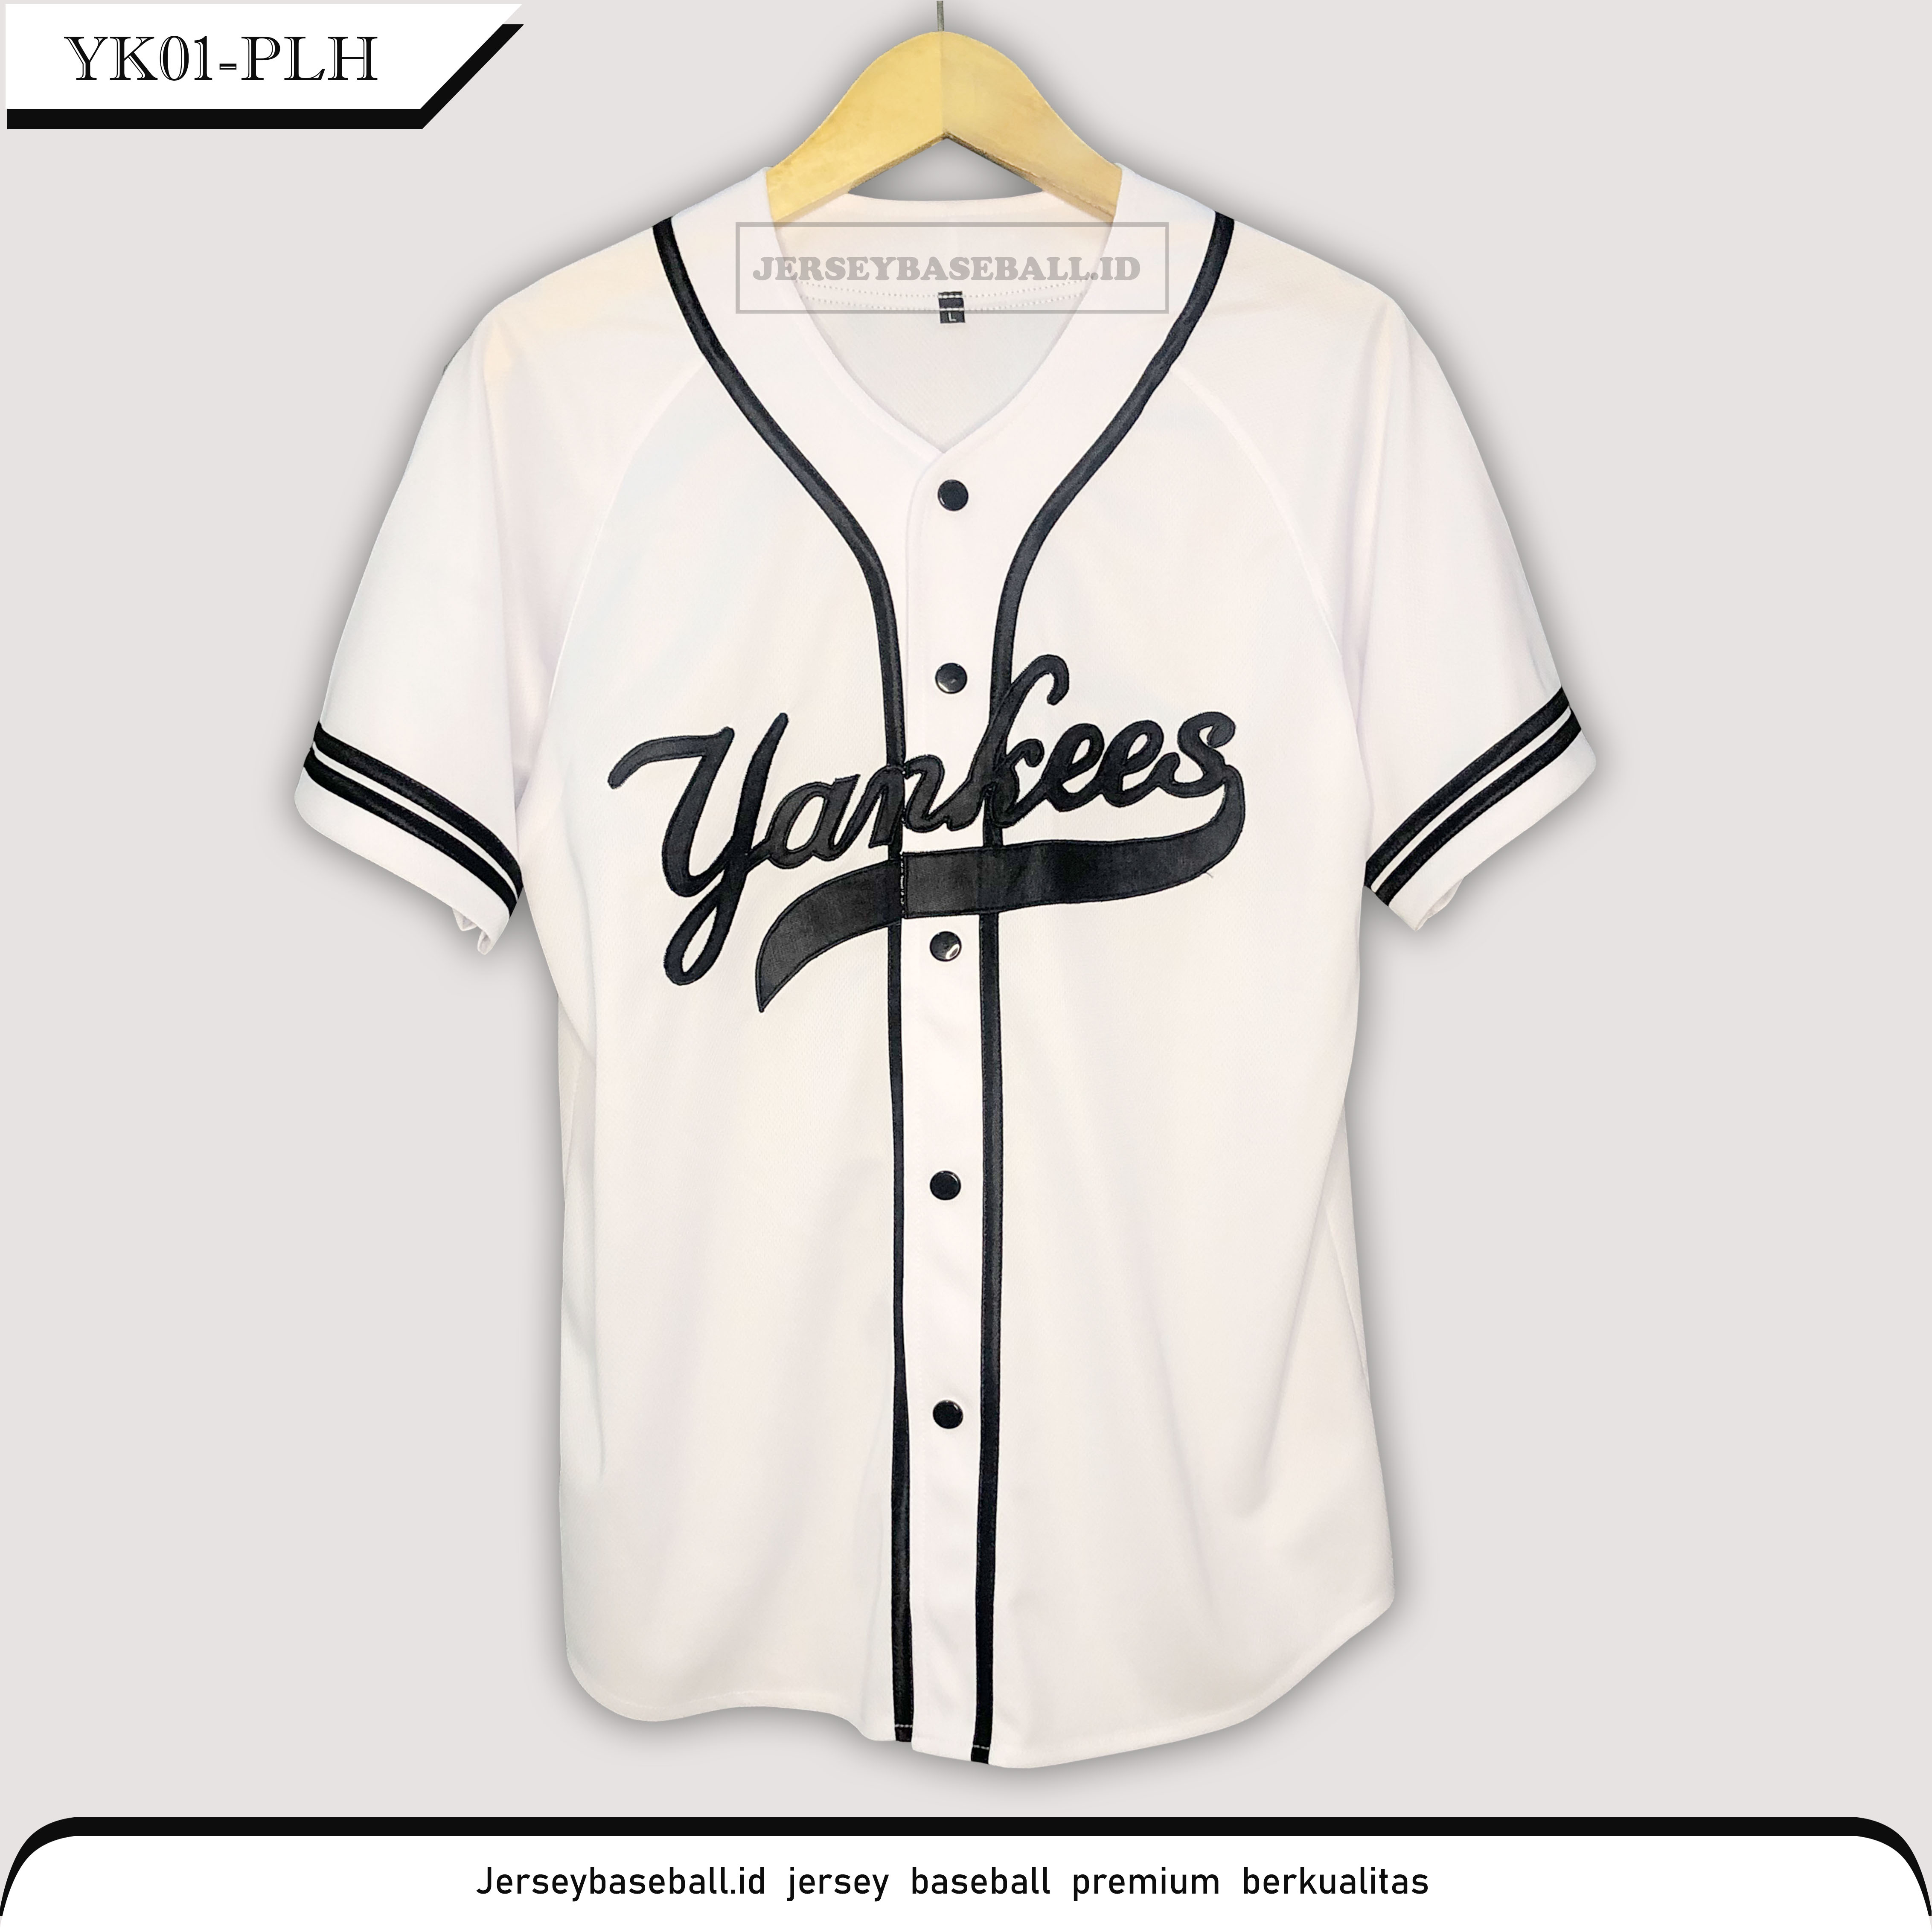 places that sell baseball jerseys